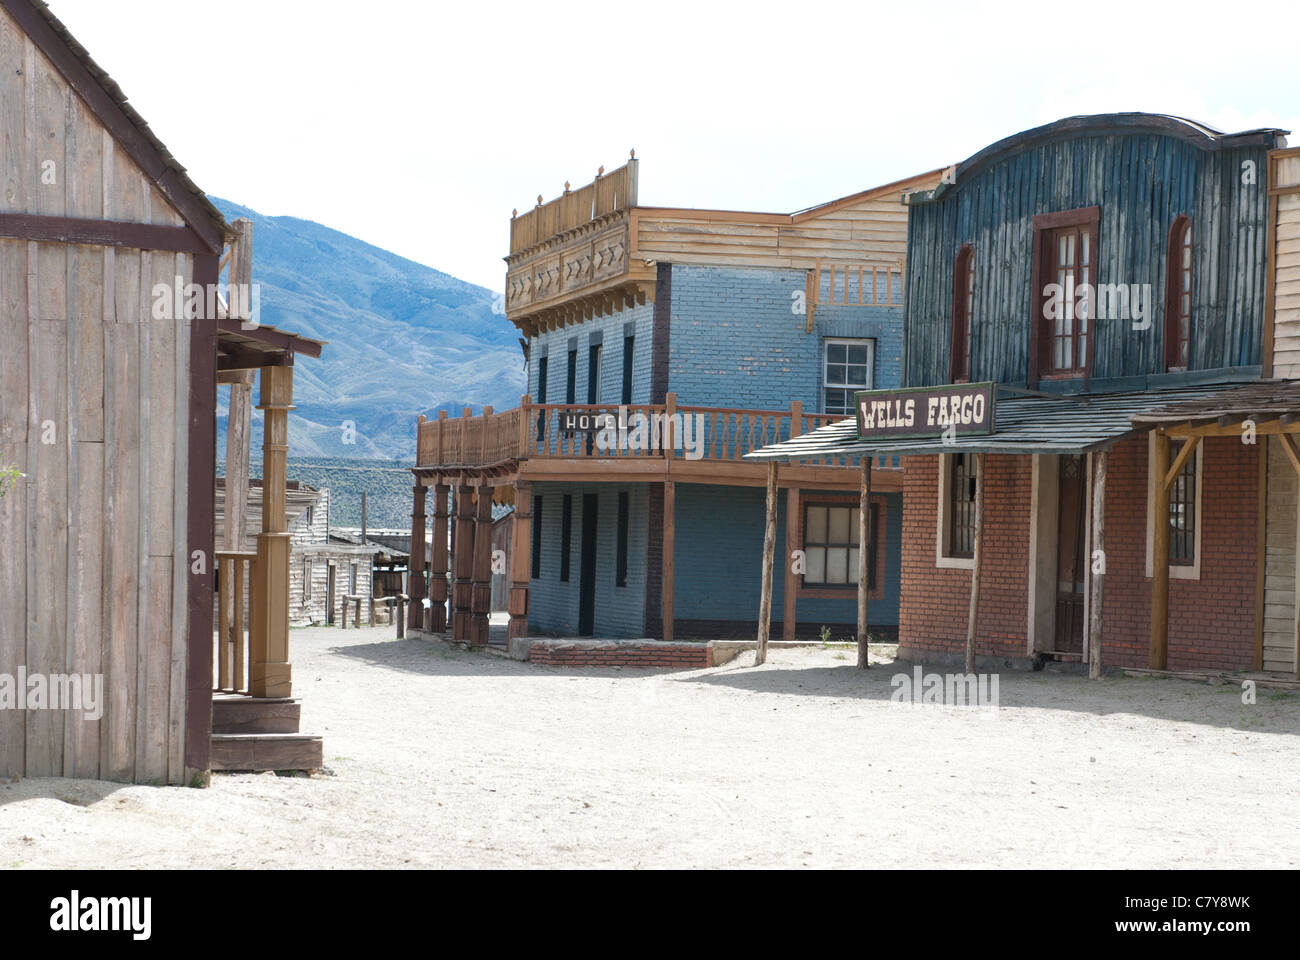 one of the villages built in the tabernas desert, spain for filming western movies Stock Photo